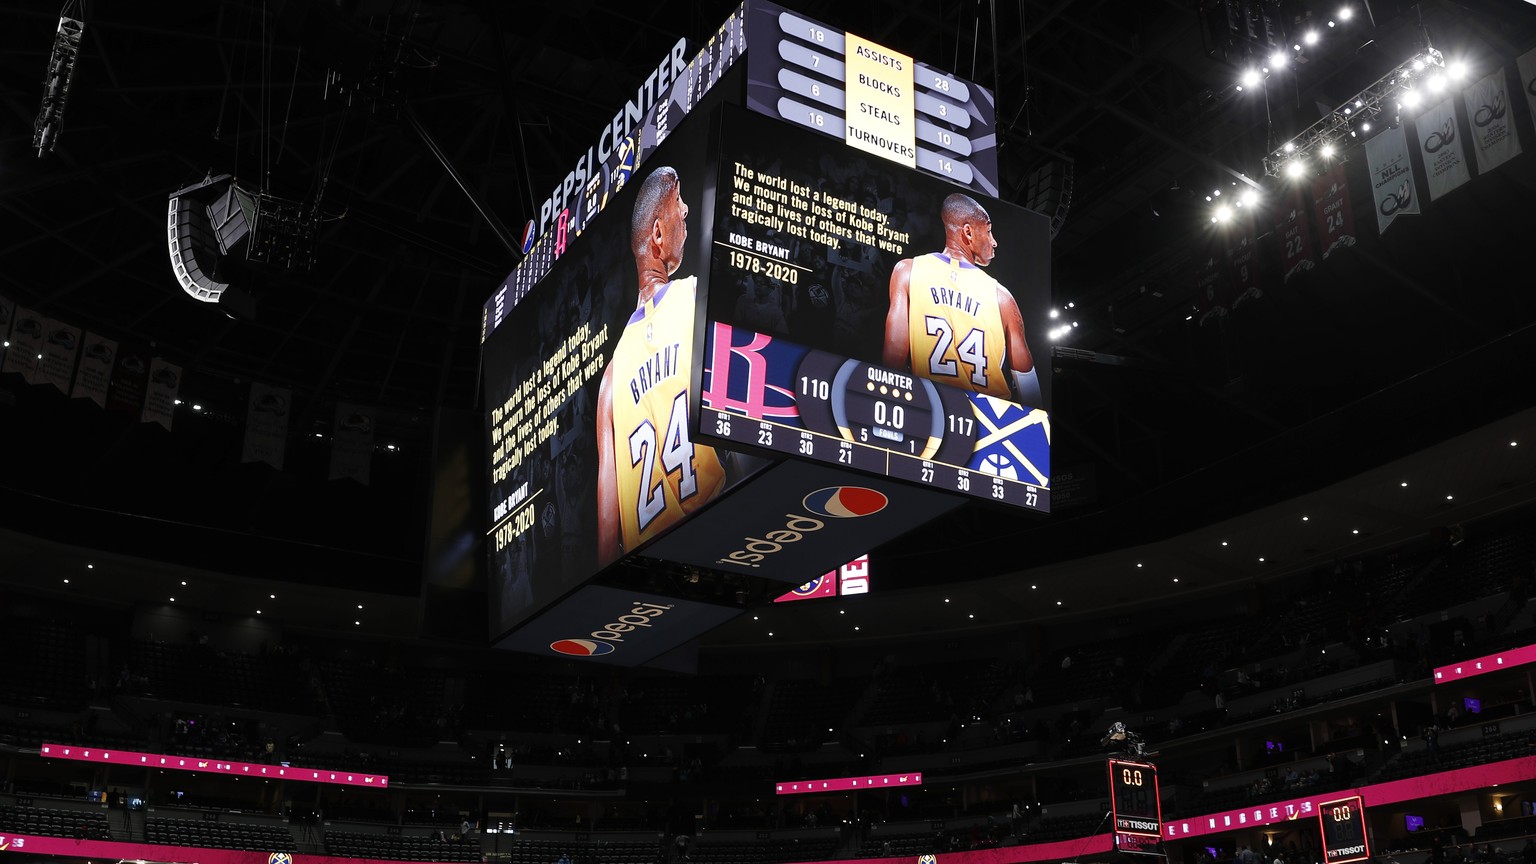 A tribute to Kobe Bryant illuminates the overhead scoreboard after the second half of an NBA basketball game Sunday, Jan. 26, 2020, in Denver. The Denver Nuggets won 117-110 over the Houston Rockets.  ...